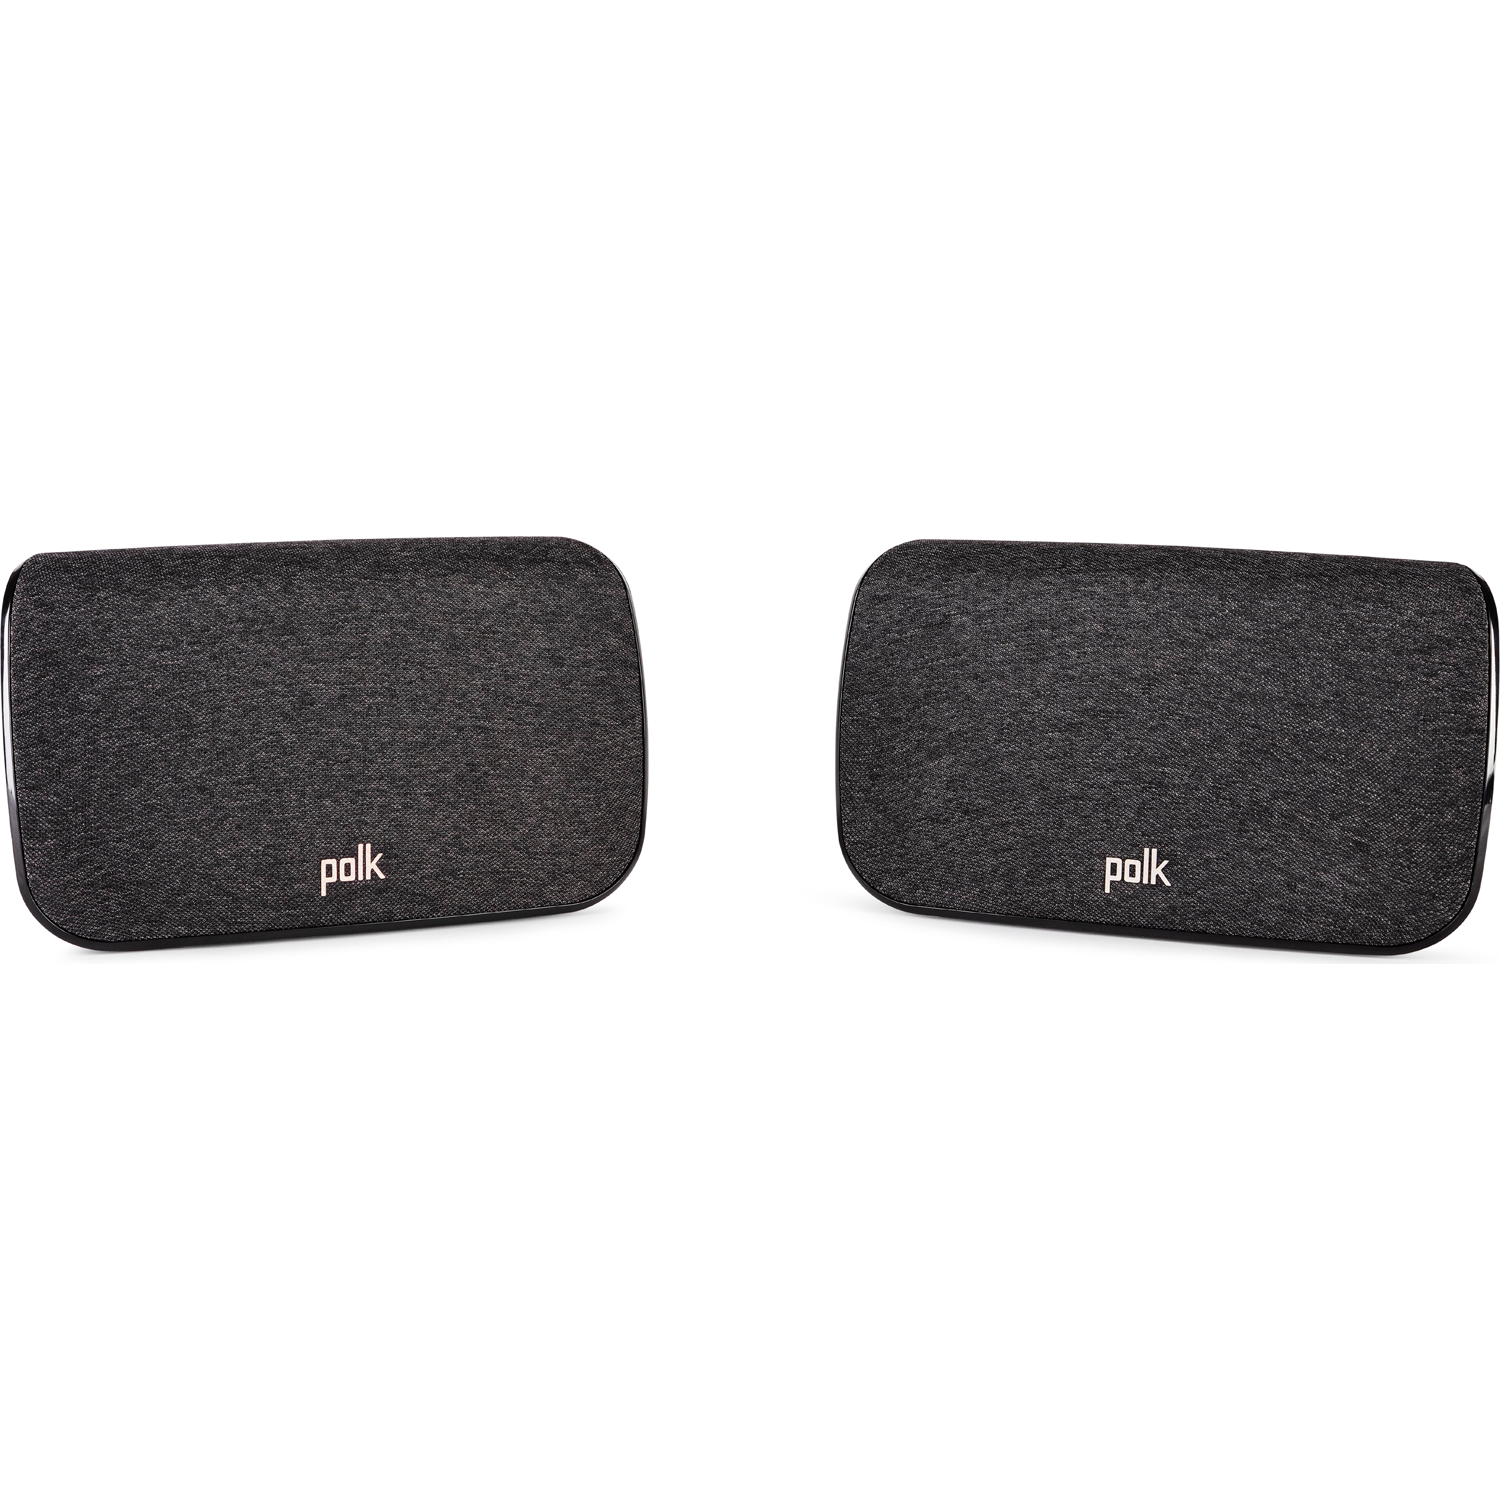 POLK AUDIO NEW SR2 PAIR Wireless Rear Surround Speakers for React, Magnifi Max AX or Mini AX or Magnifi 2 ONLY